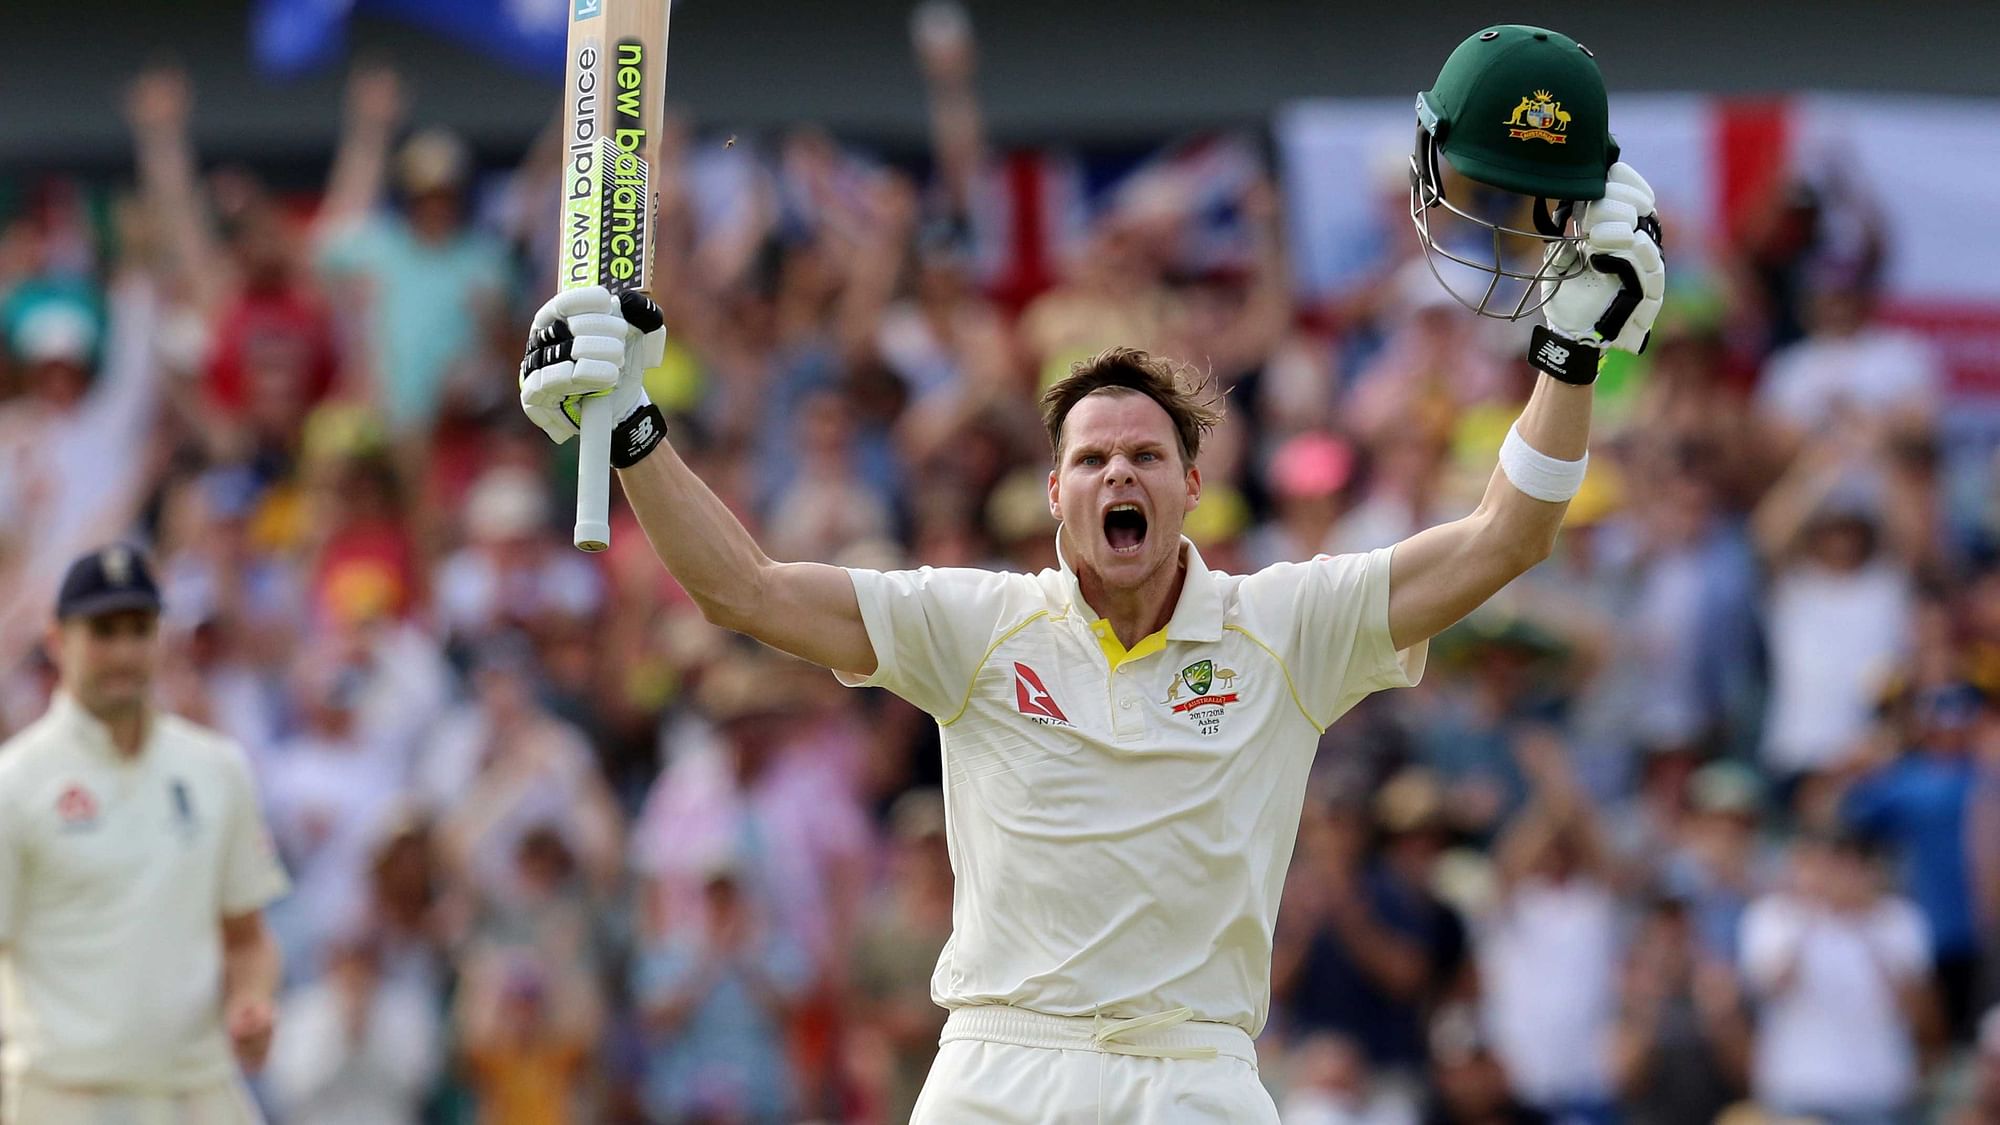 Steve Smith celebrates after scoring a double century on Day 3 of the Perth Test. File.